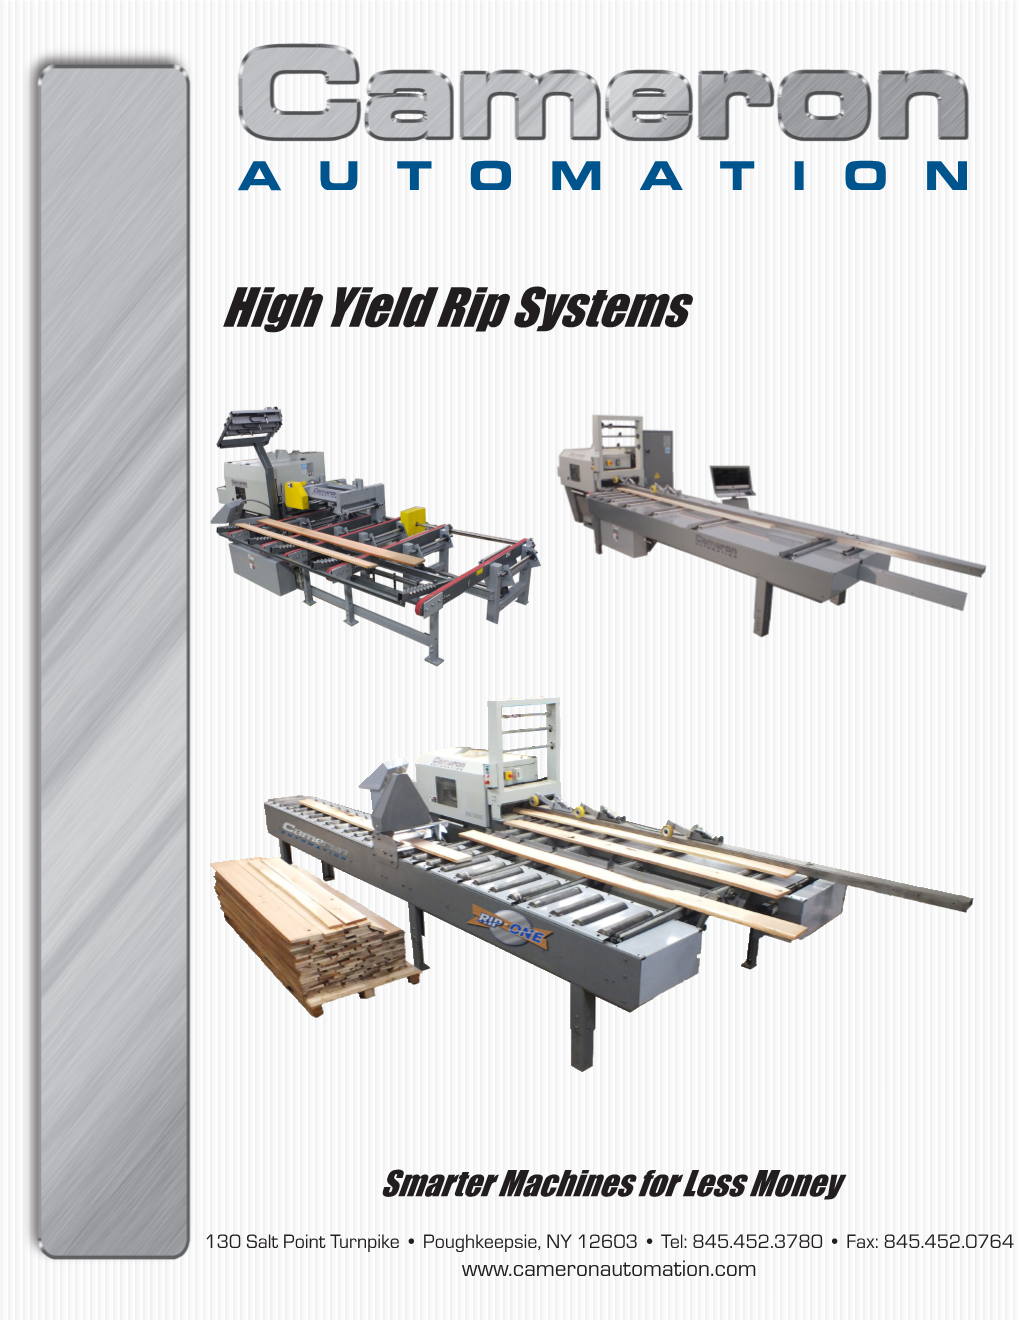 High Yield Rip Systems